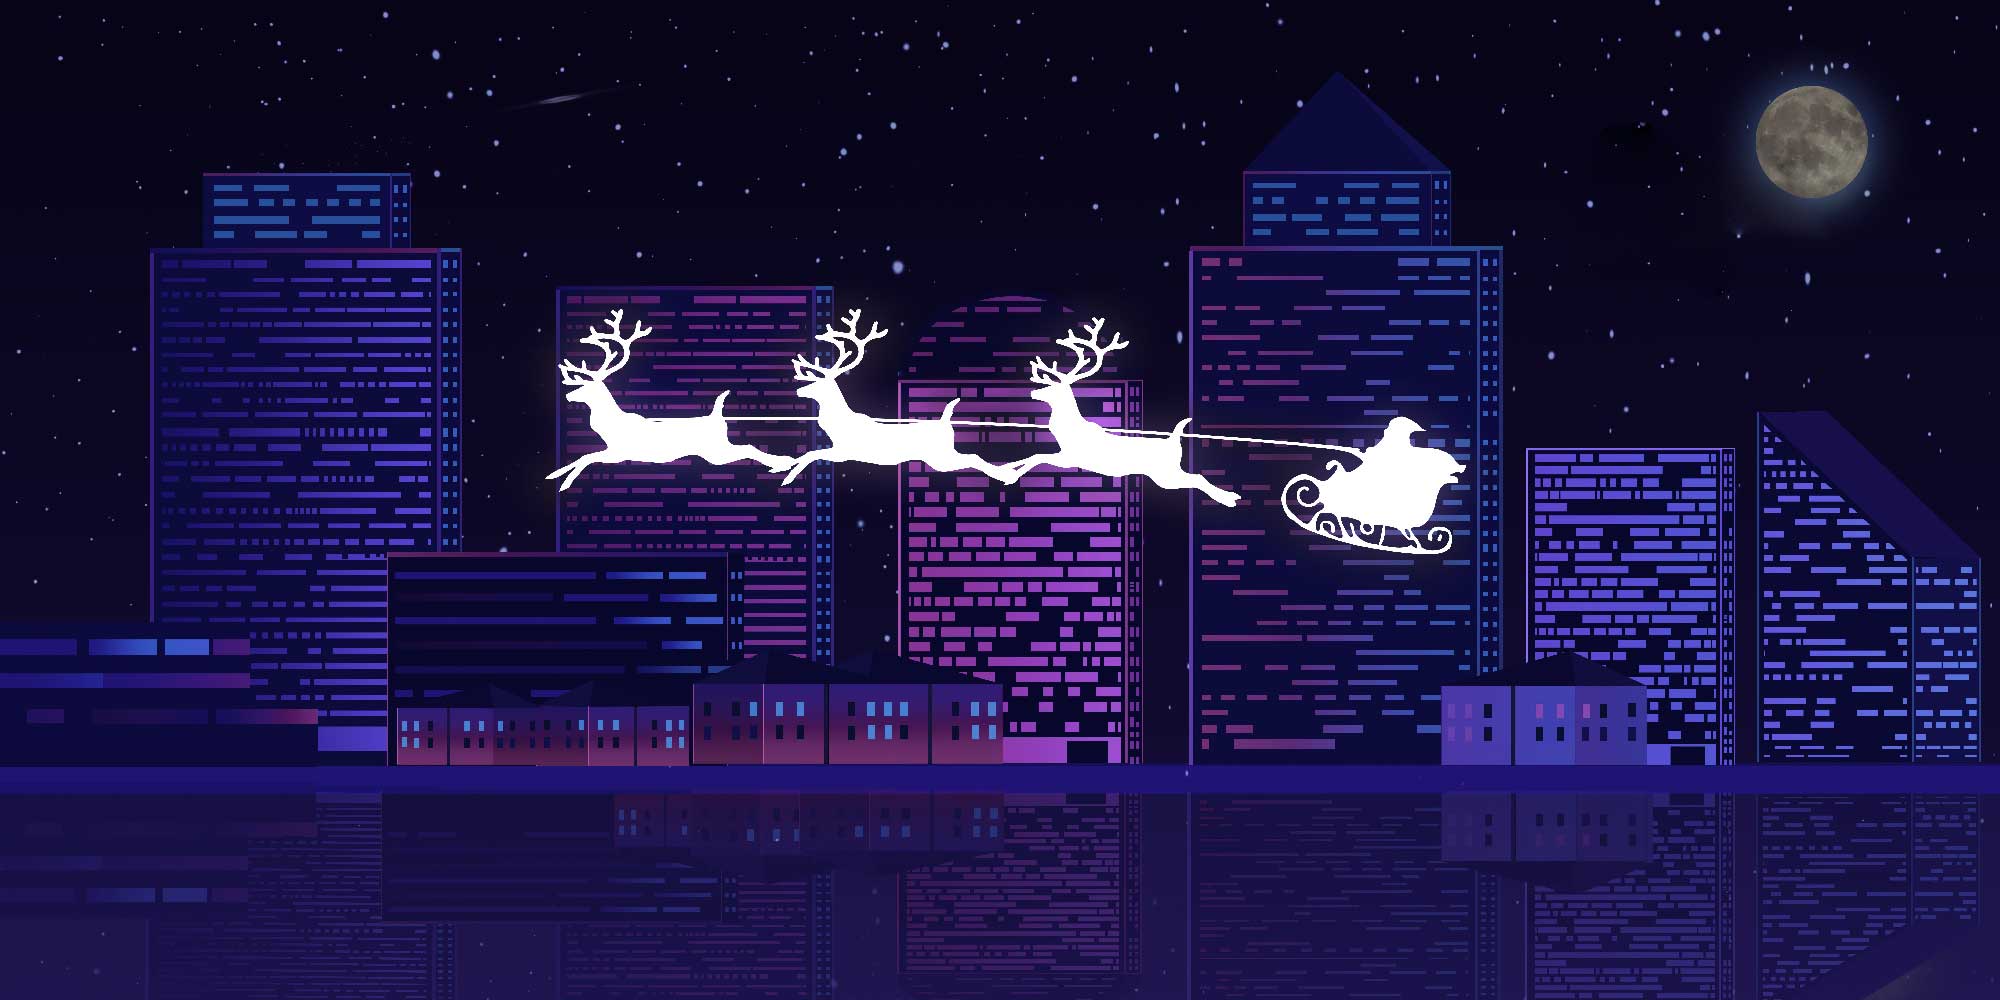 Why Does NORAD Track Santa's Sleigh Ride?